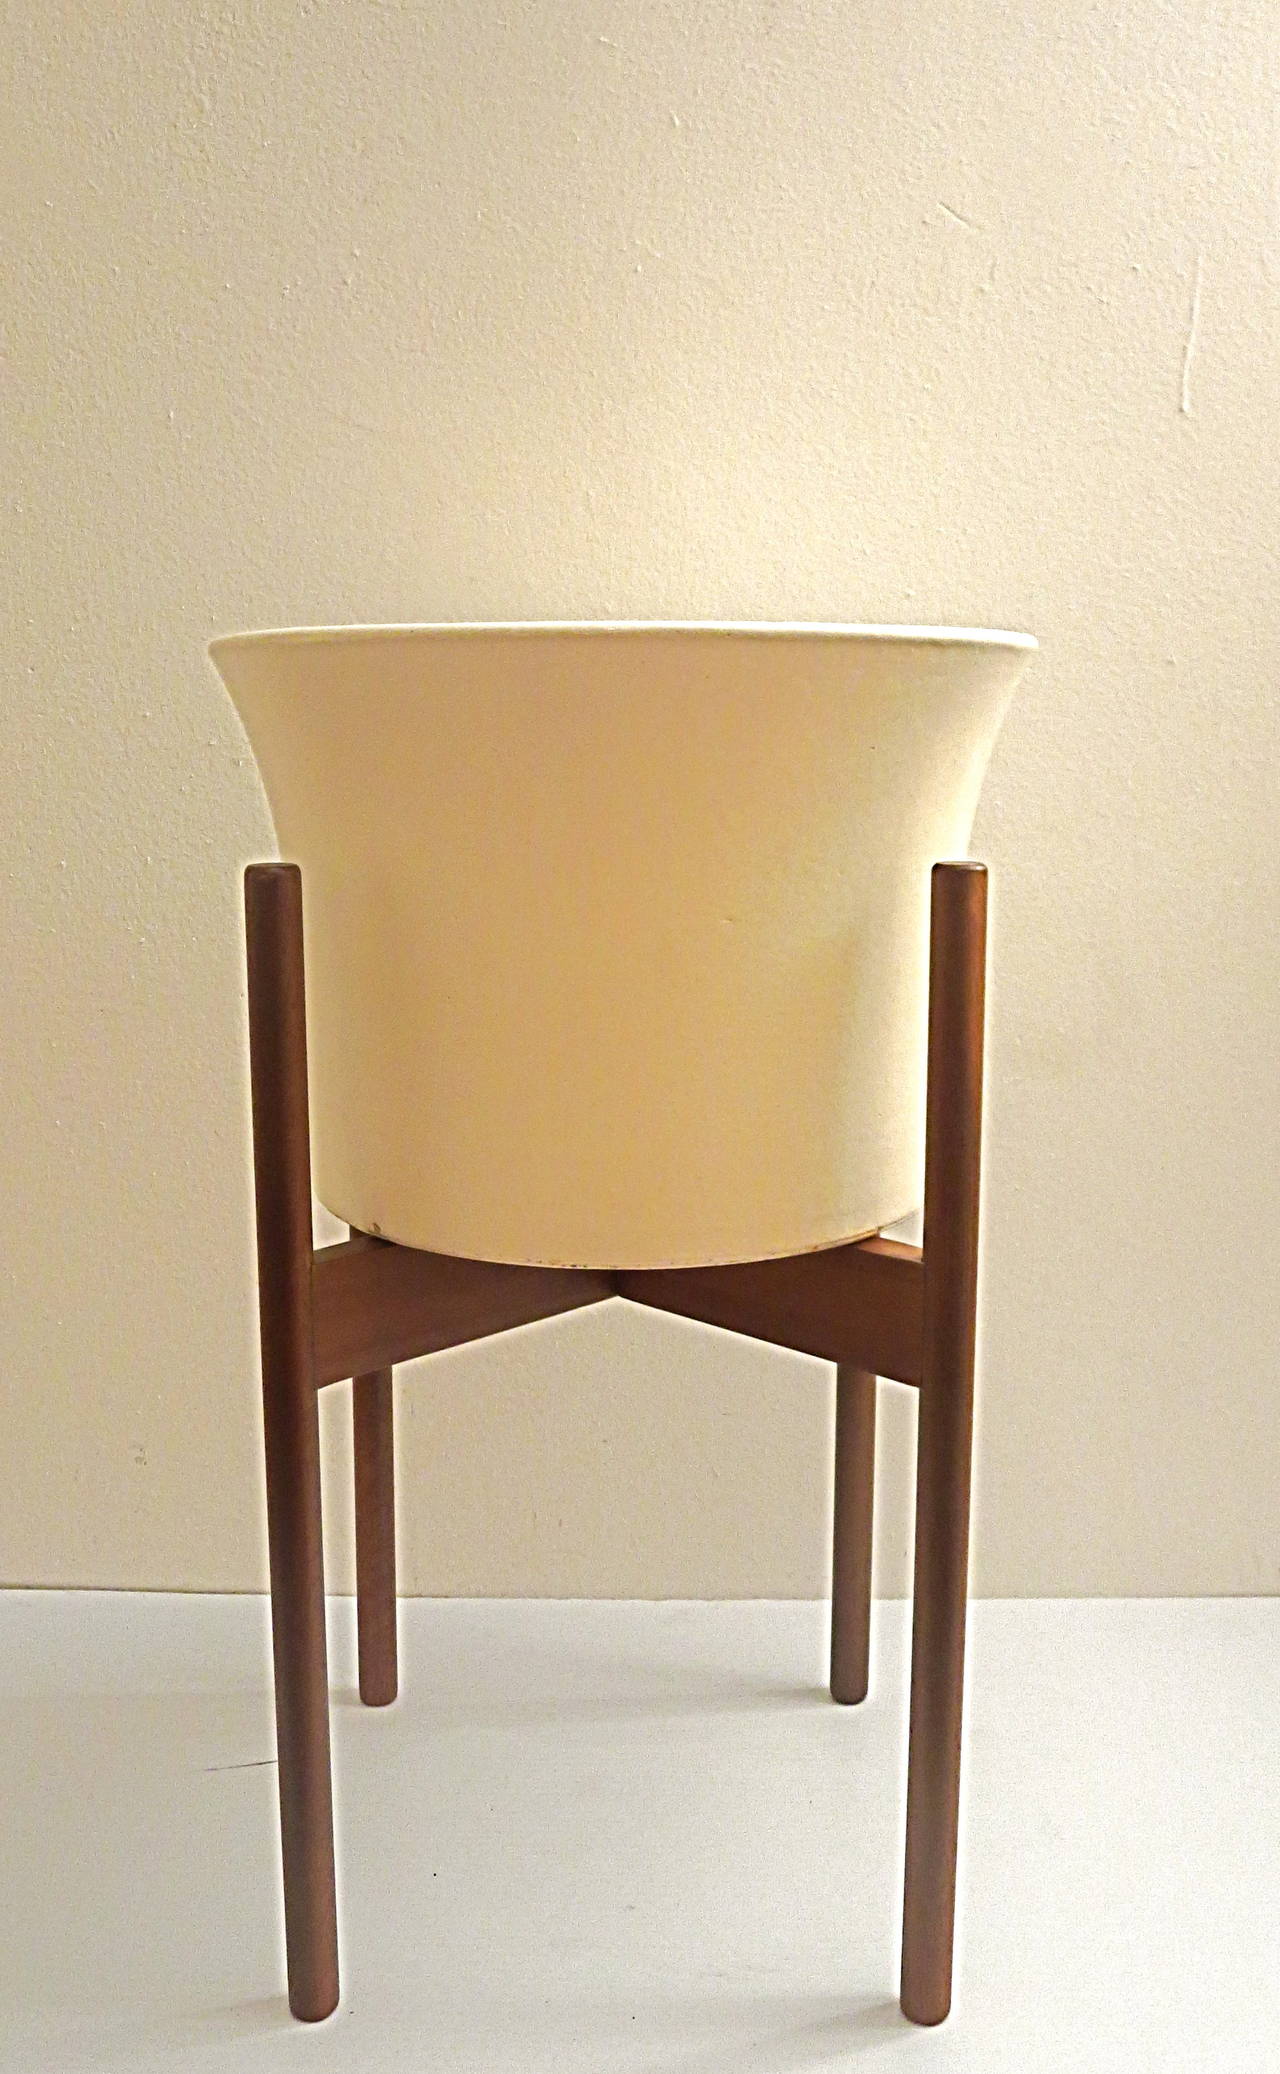 Great design on this rare architectural pottery planter and walnut stand designed by Marilyn Kay Austin for architectural pottery, circa 1960s, in white mate finish great condition no chips or cracks the planter its 14